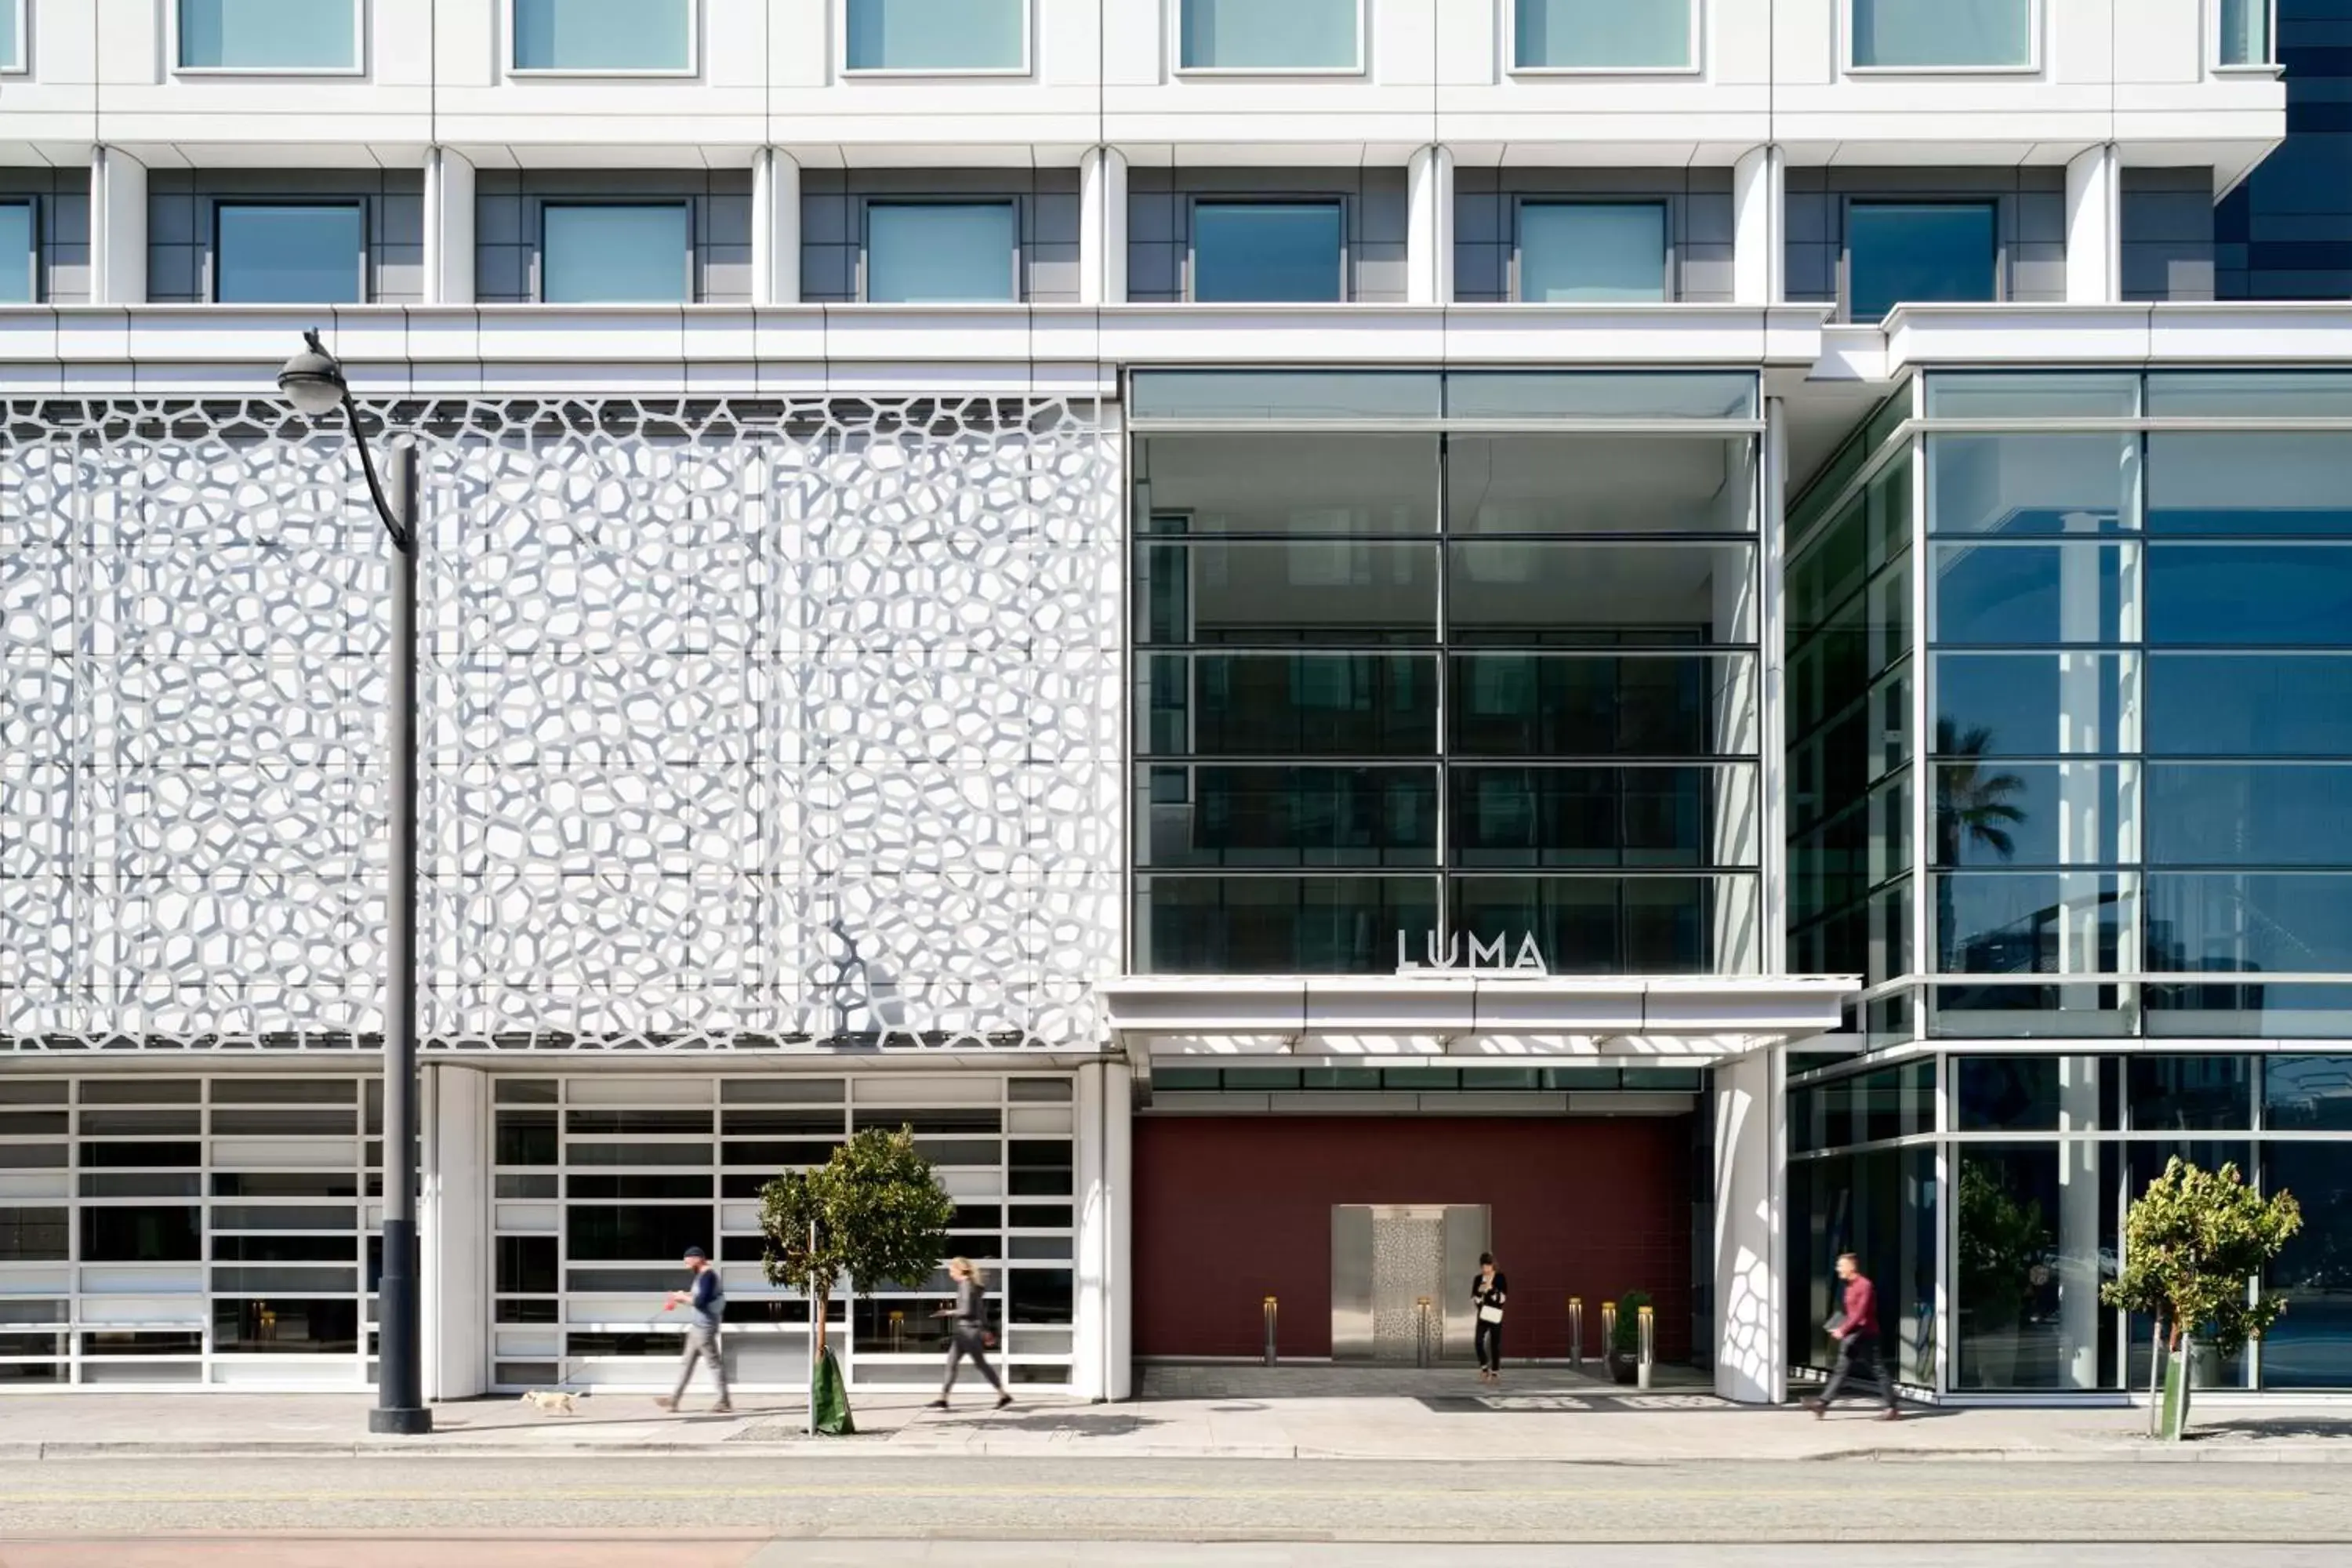 Property Building in LUMA Hotel San Francisco - #1 Hottest New Hotel in the US